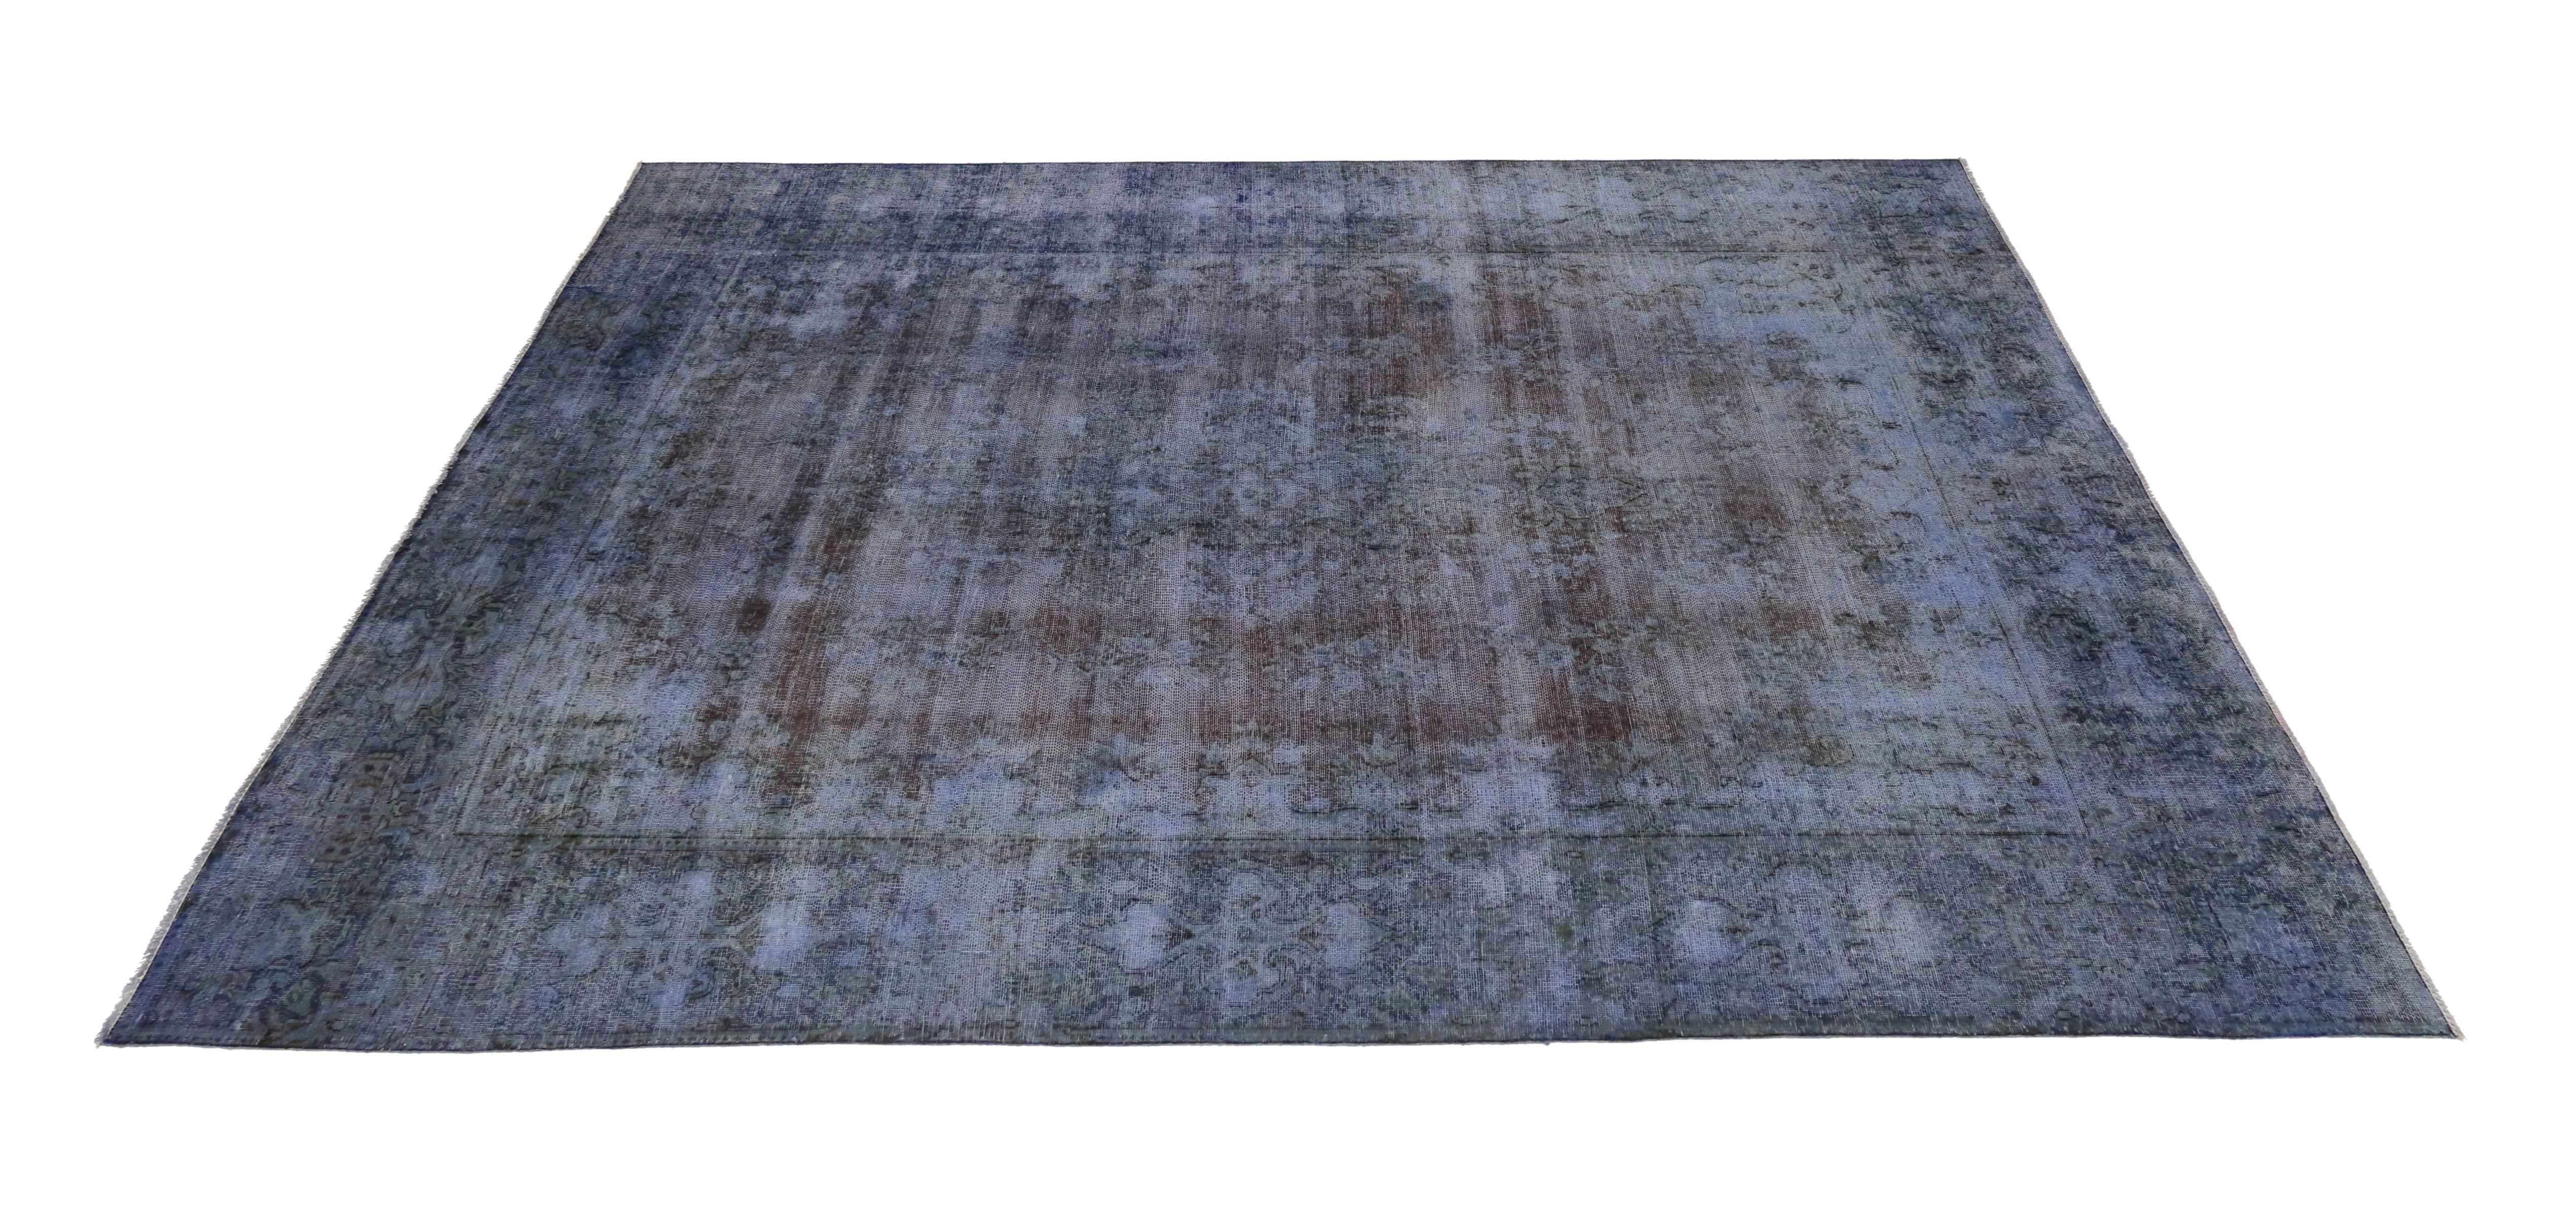 Distressed Vintage Persian Rug Overdyed with Modern Industrial Style 1